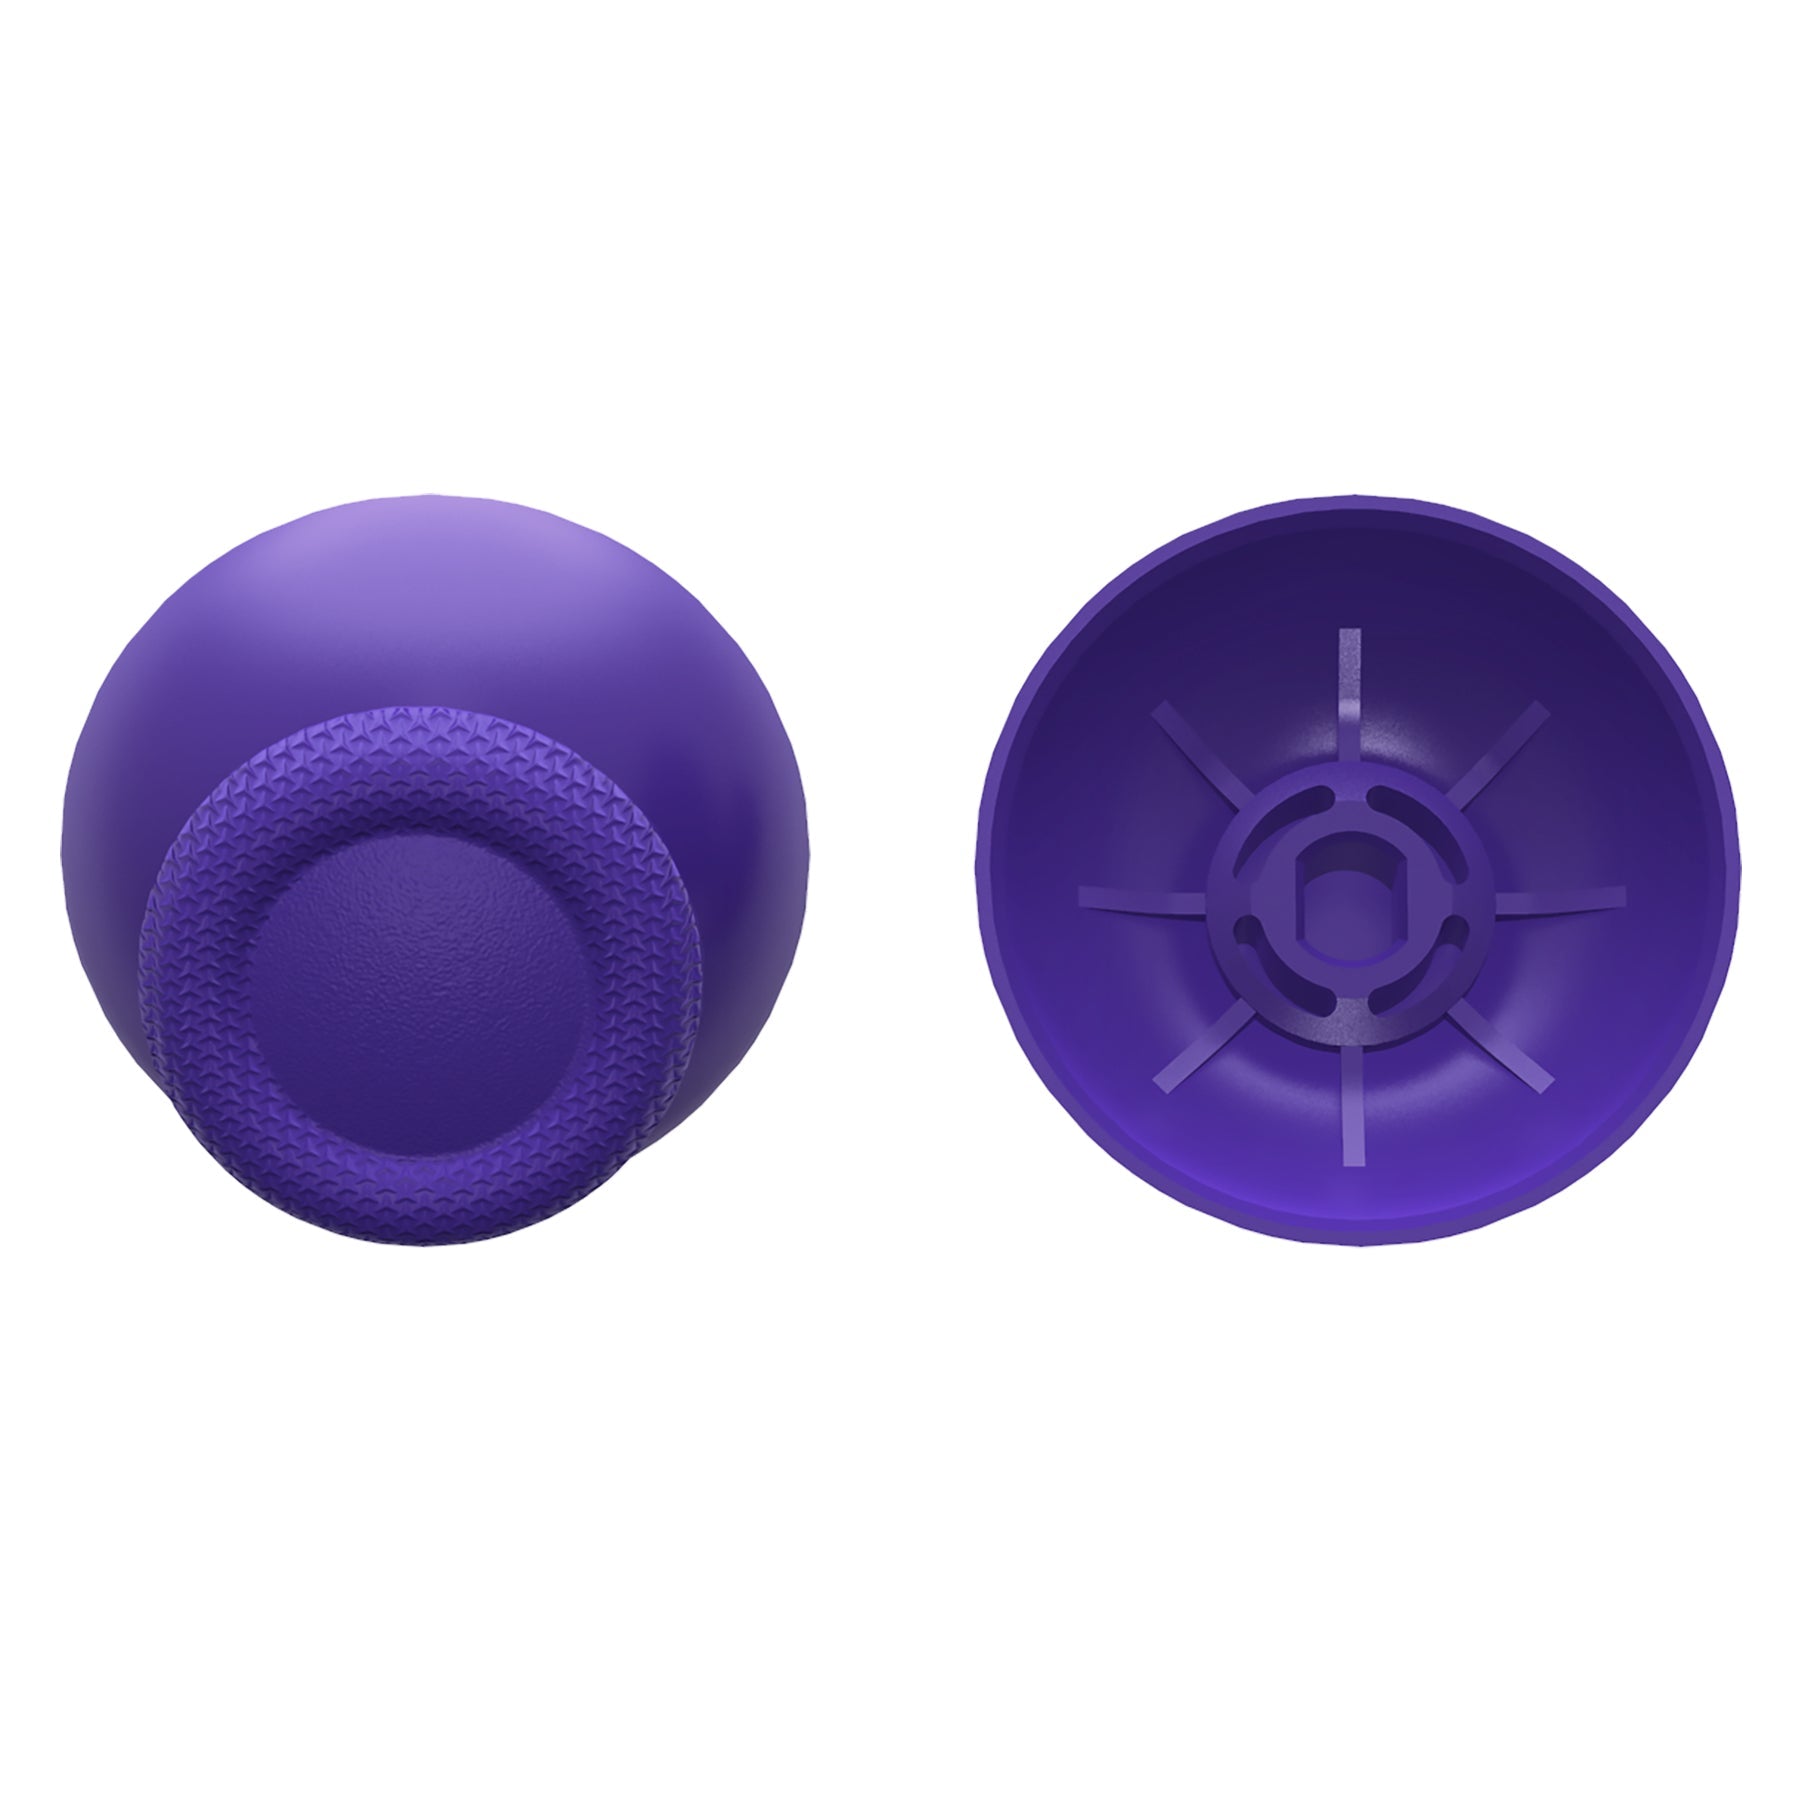 eXtremeRate Retail Purple Replacement Thumbsticks for ps5 Controller, Custom Analog Stick Joystick Compatible with ps5, for ps4 All Model Controller - JPF605